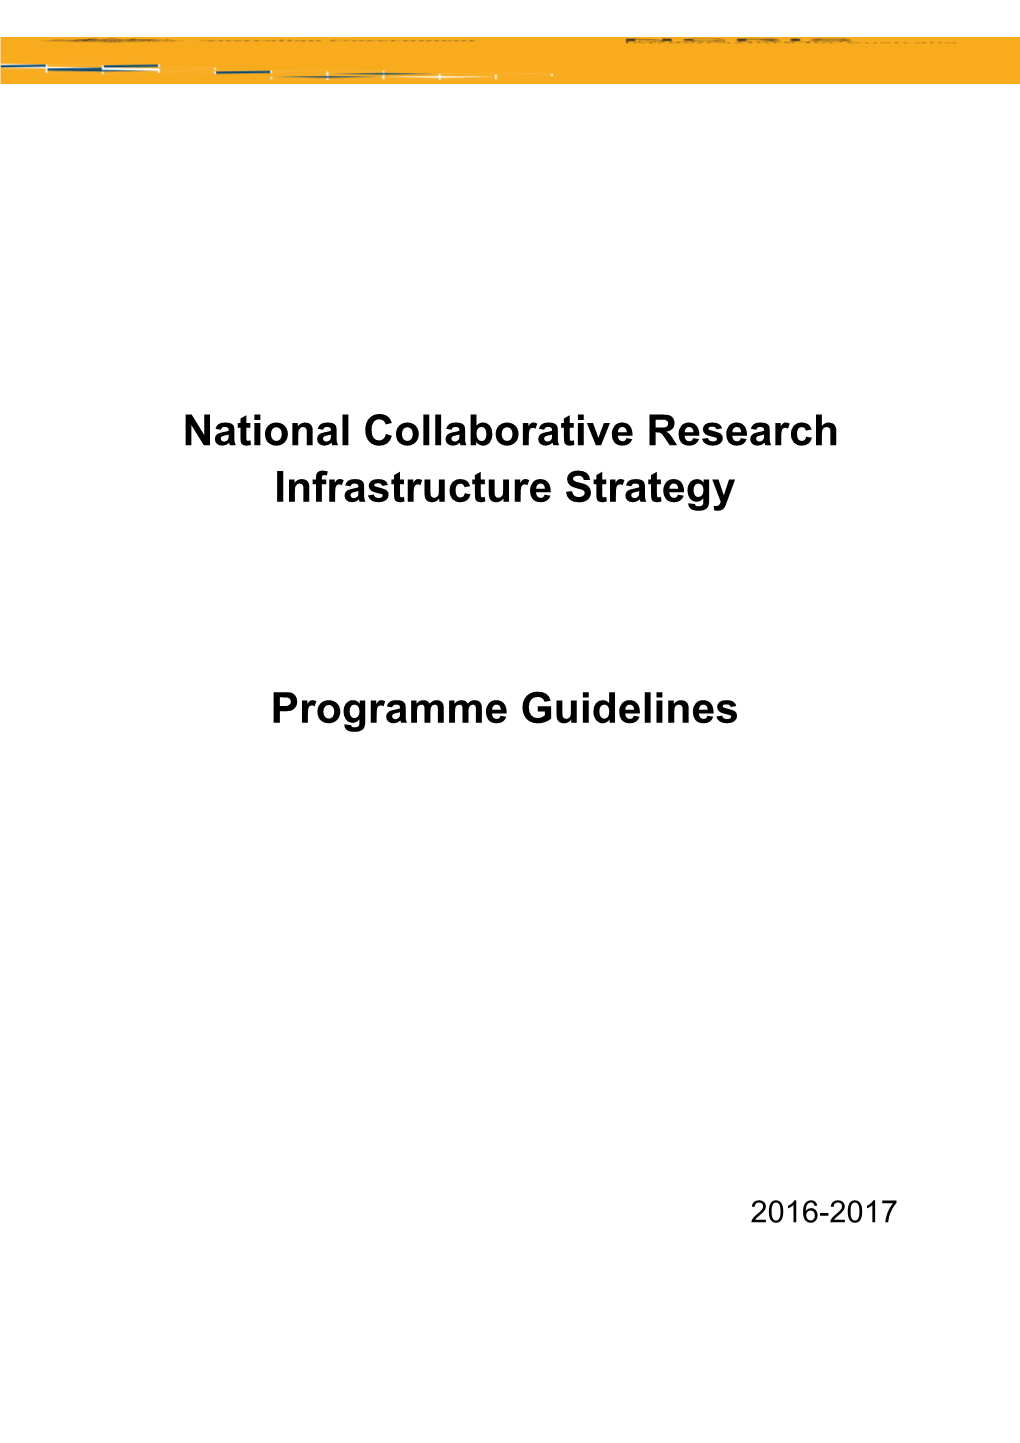 National Collaborative Research Infrastructure Strategy